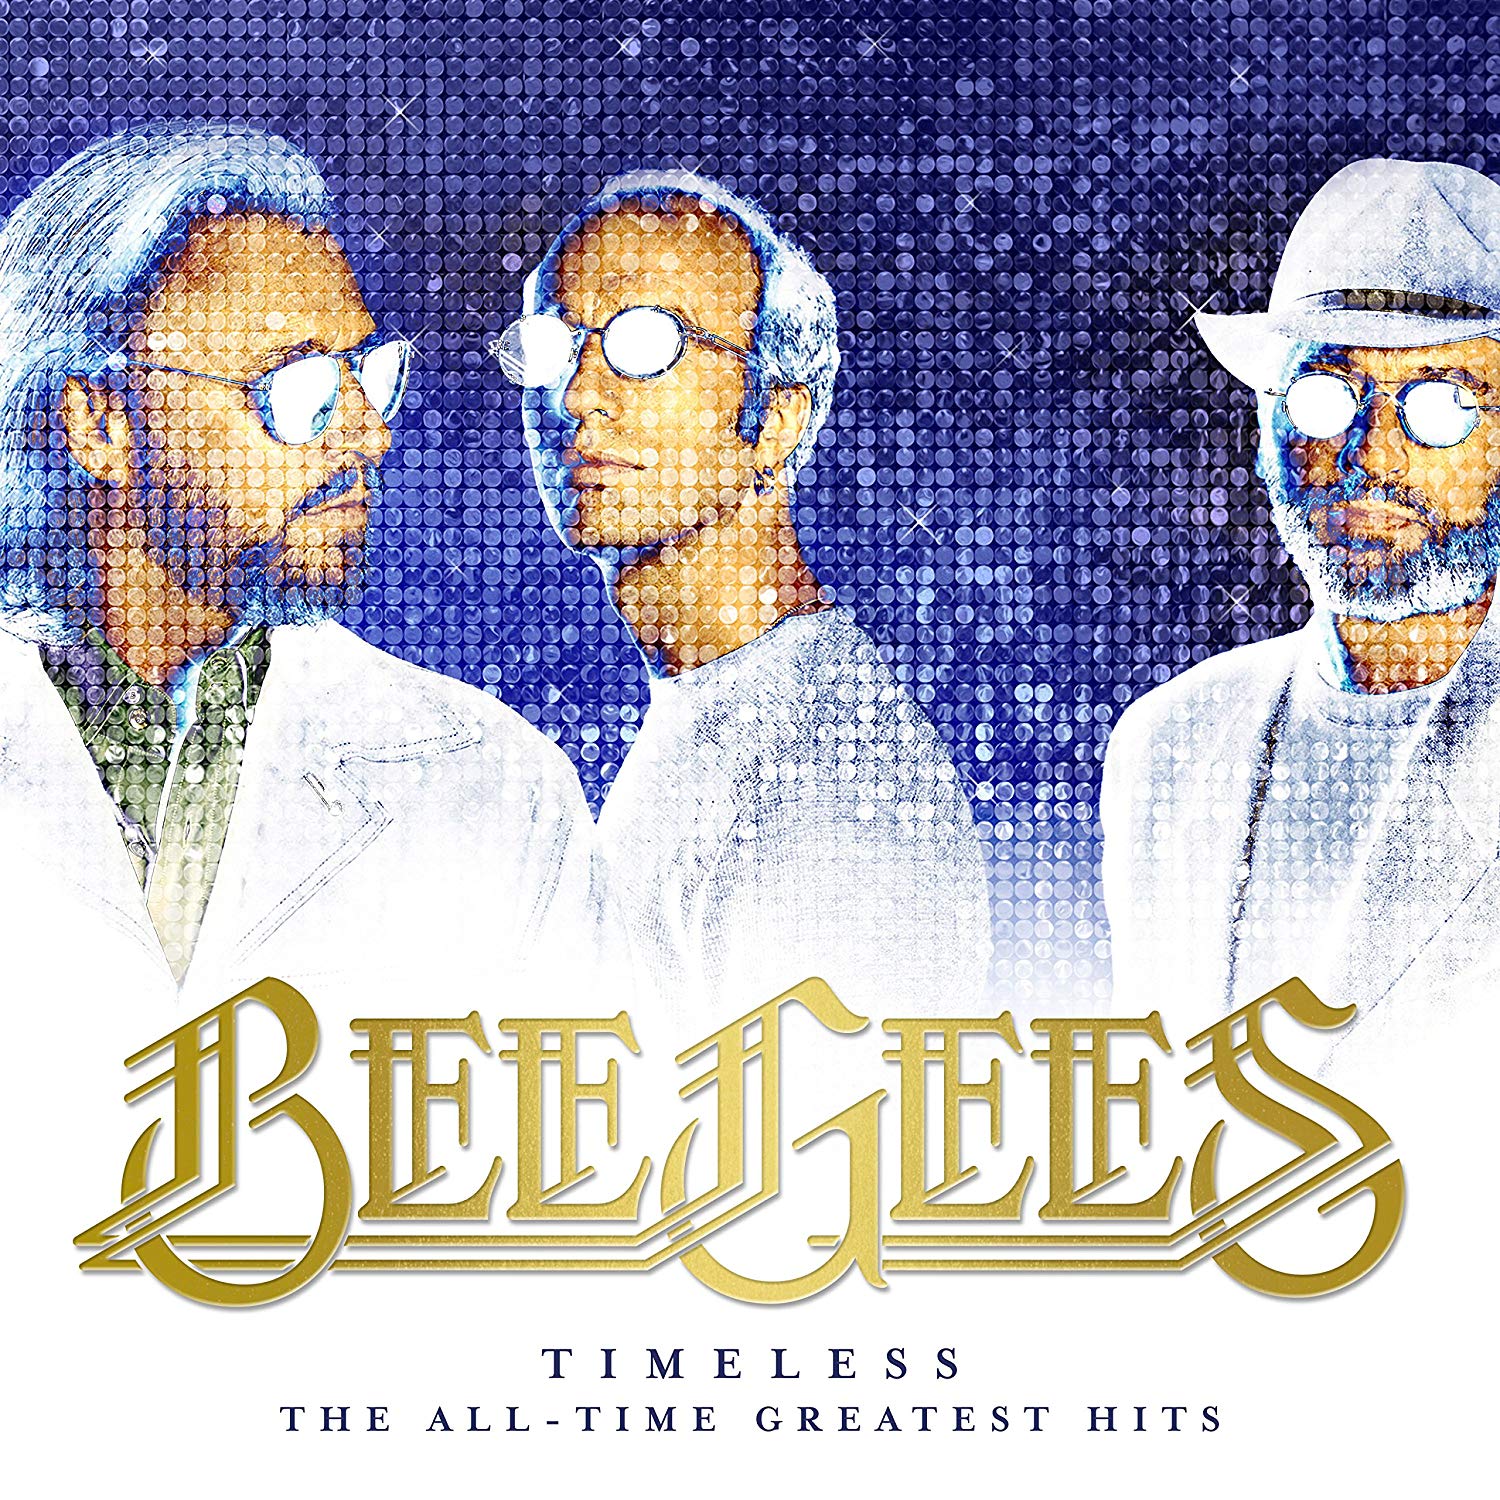 Timeless – The All-Time Greatest Hits | Bee Gees ‎ All-Time poza noua